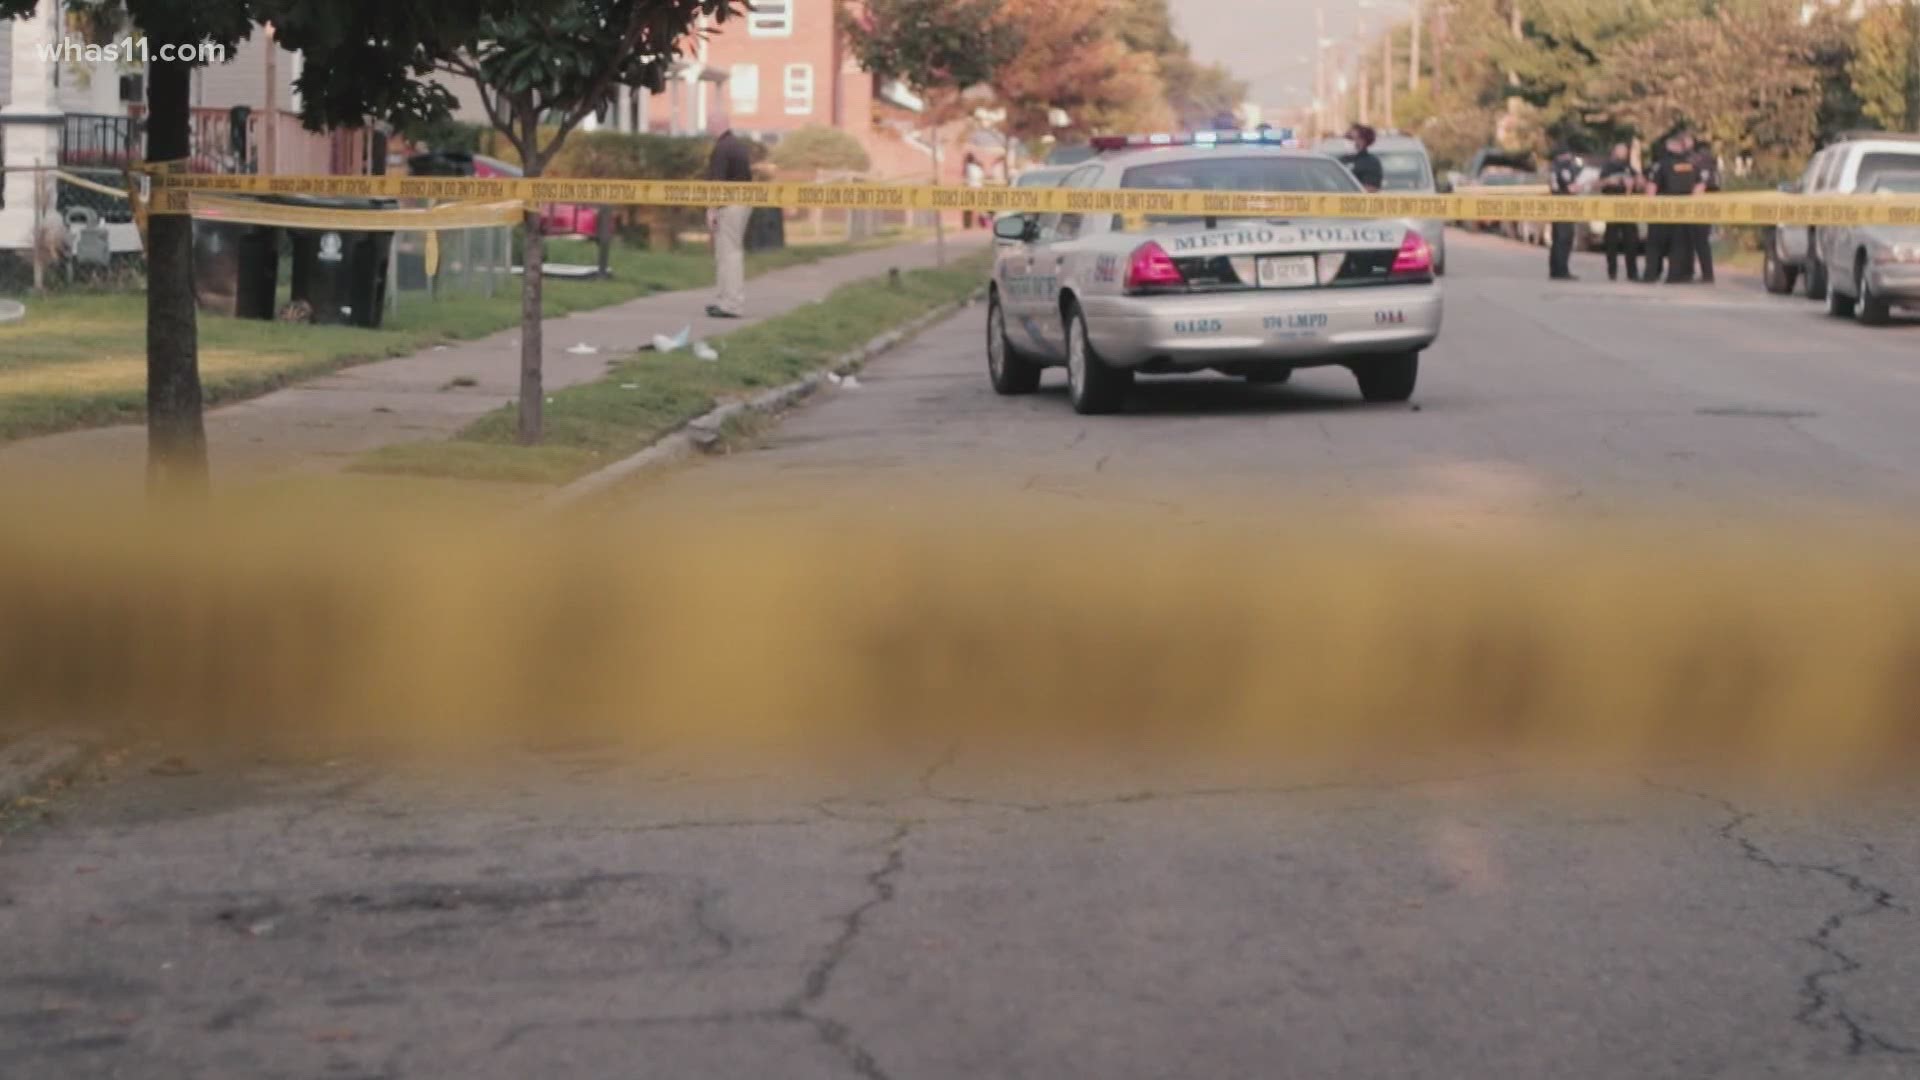 Police are investigating after a man was shot and killed on South 24th Street and West Madison Street on Aug. 18.